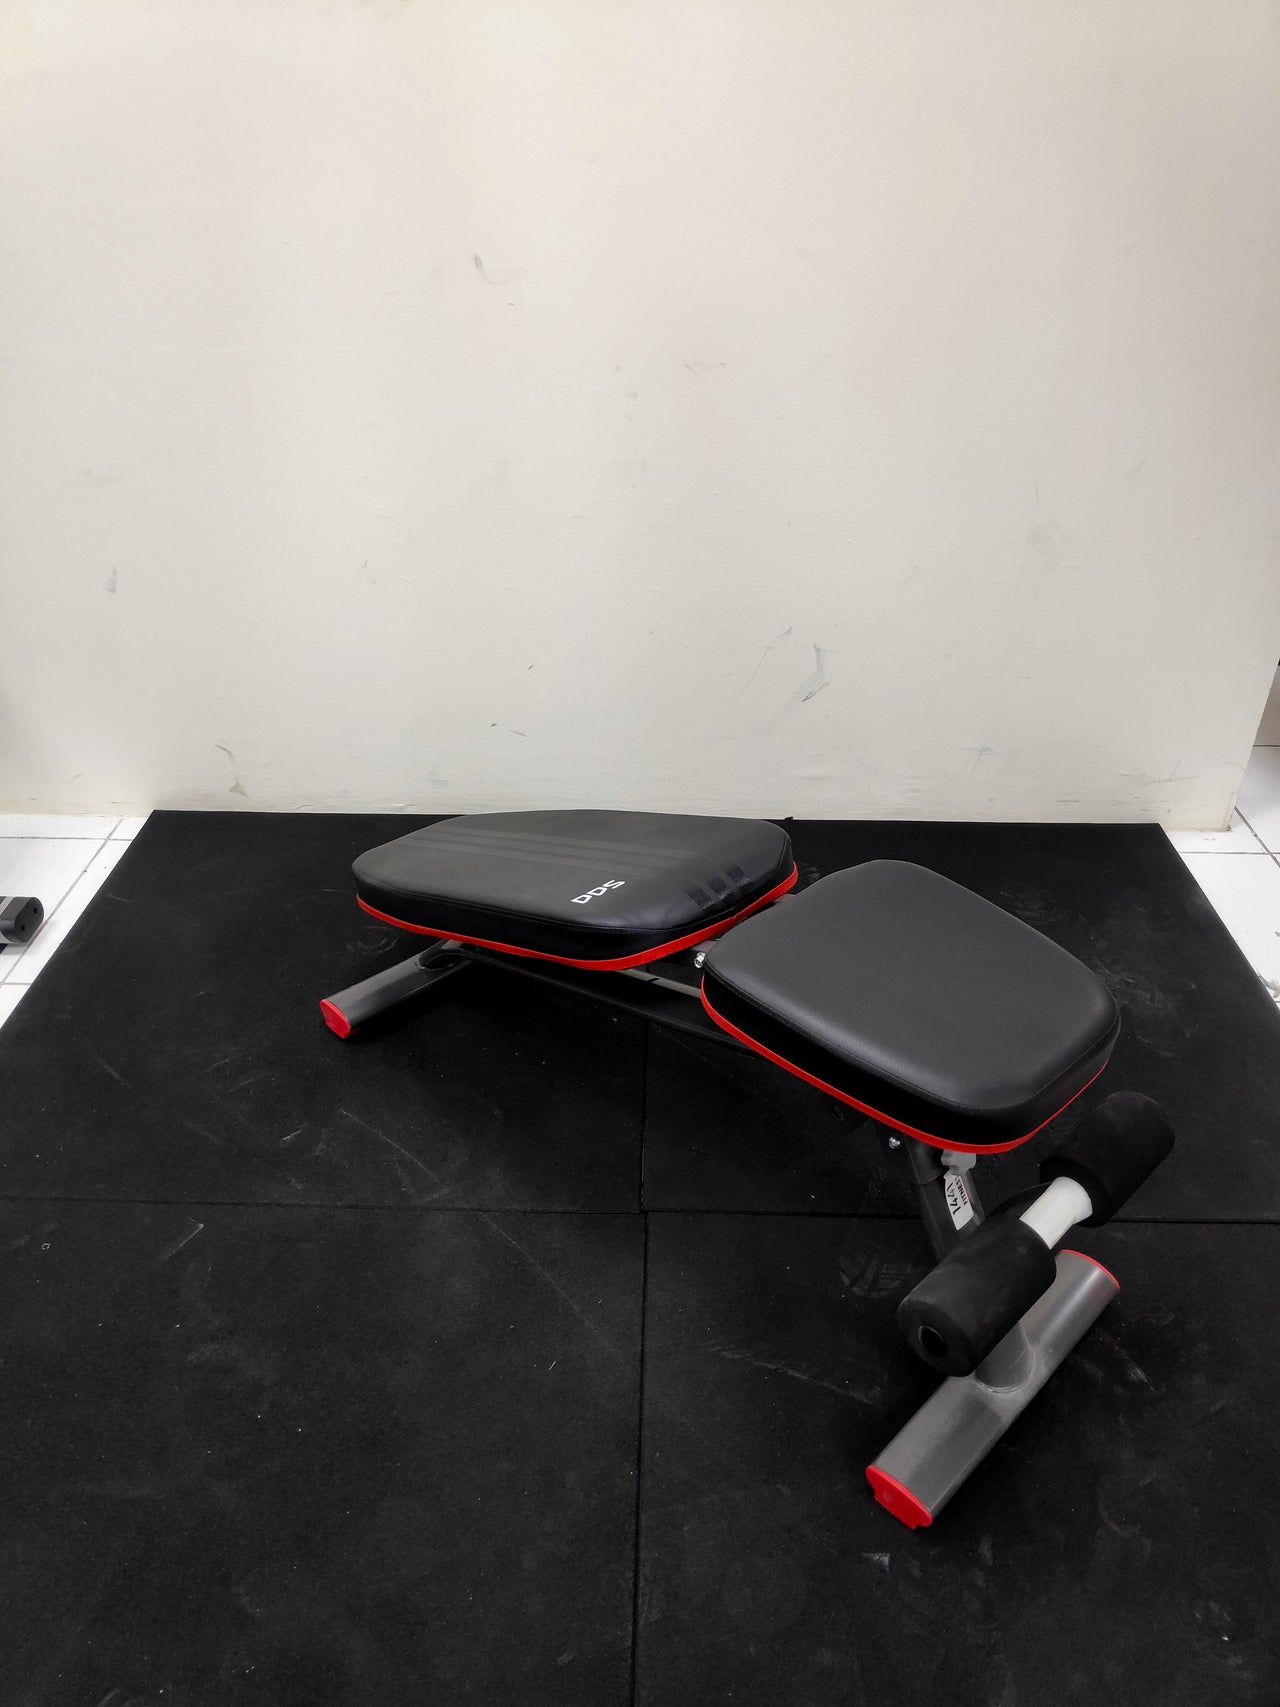 Simple yet functional Gym weight bench